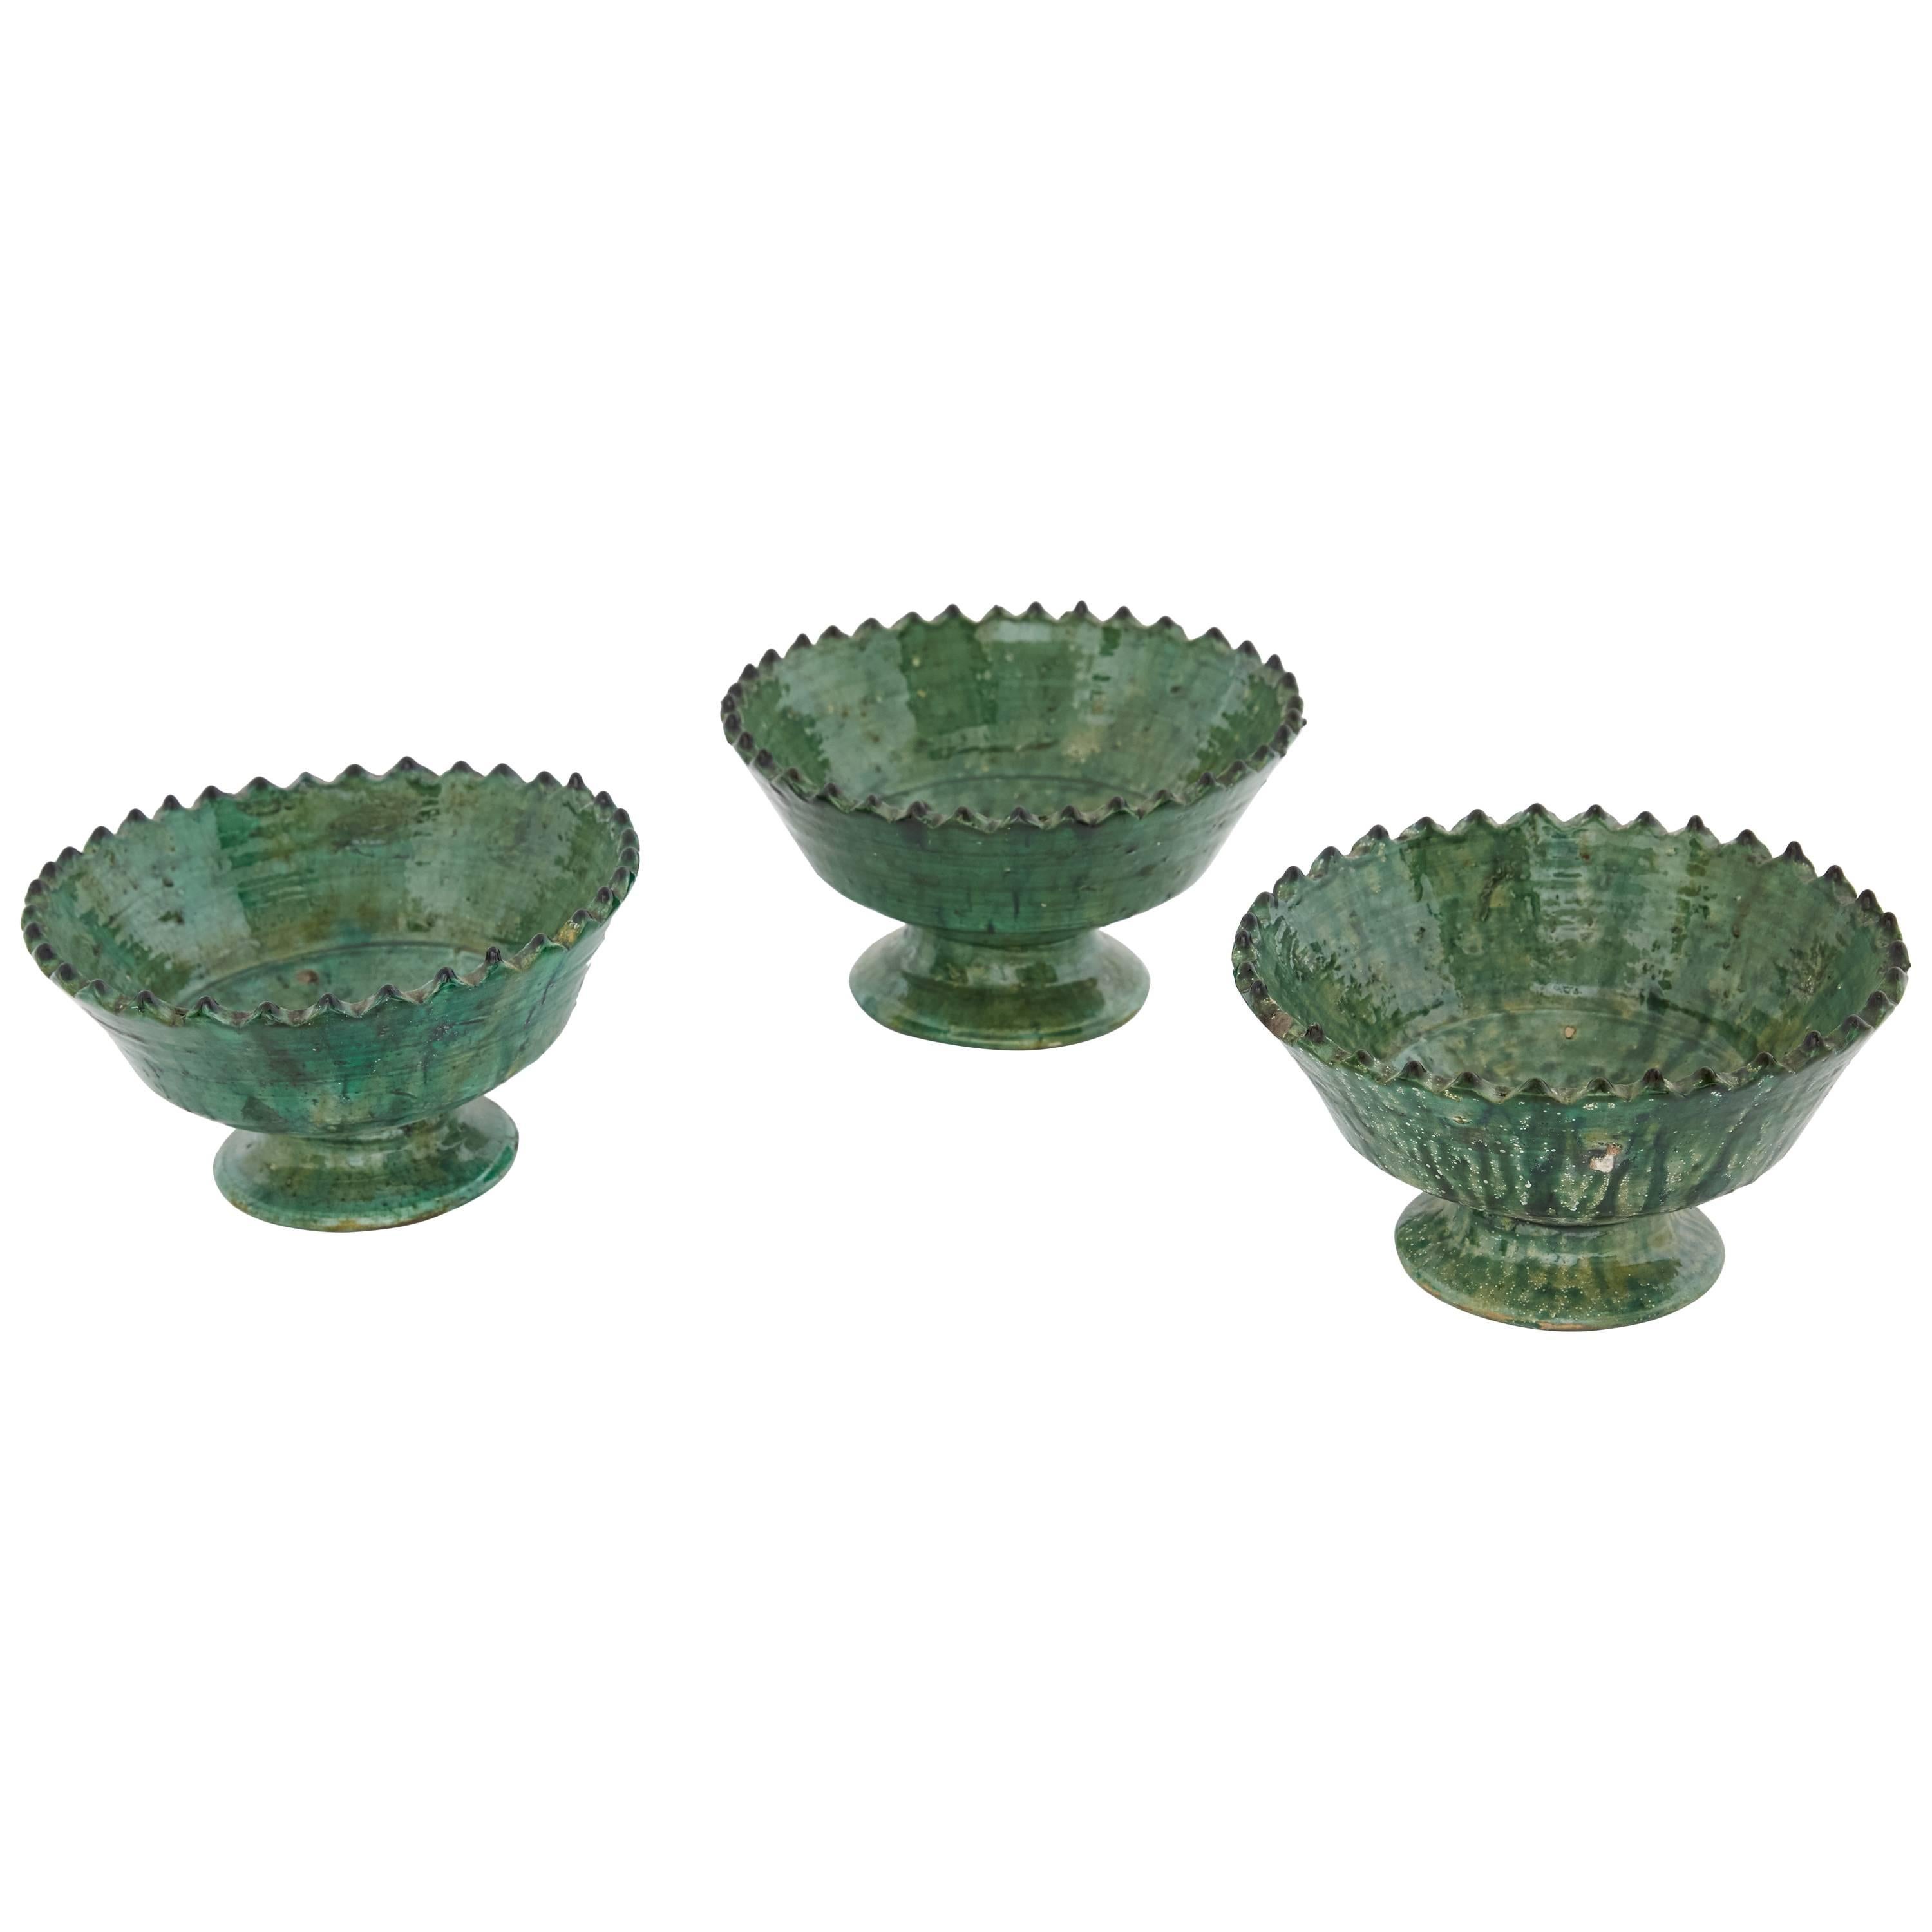 Handcrafted Ivy Green Bowls from Morocco, Set of Three